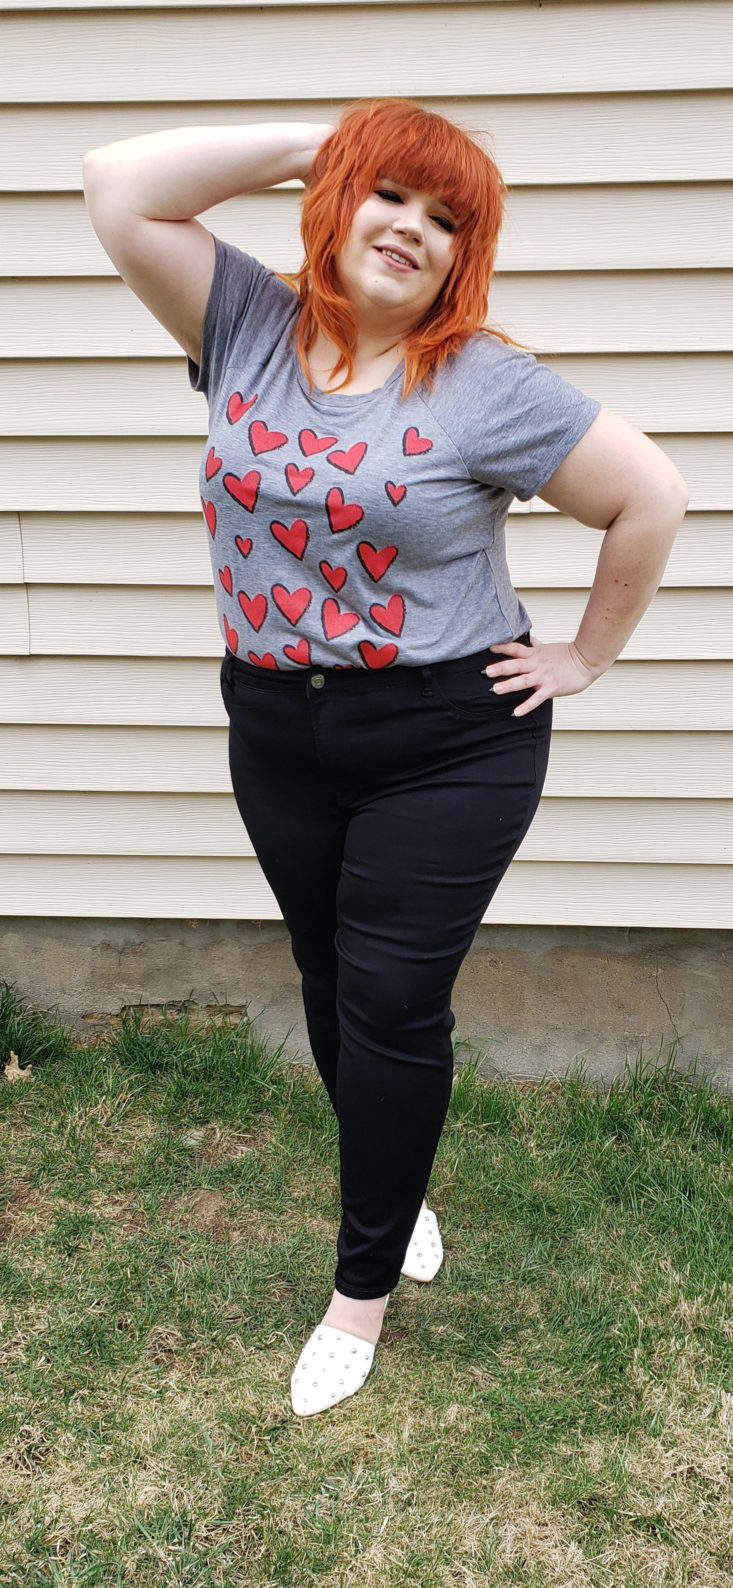 Dia & Co Subscription Box Review March 2019 - Phillips Short Sleeve Graphic Tee by Molly&Isadora Size 2x 3 Front